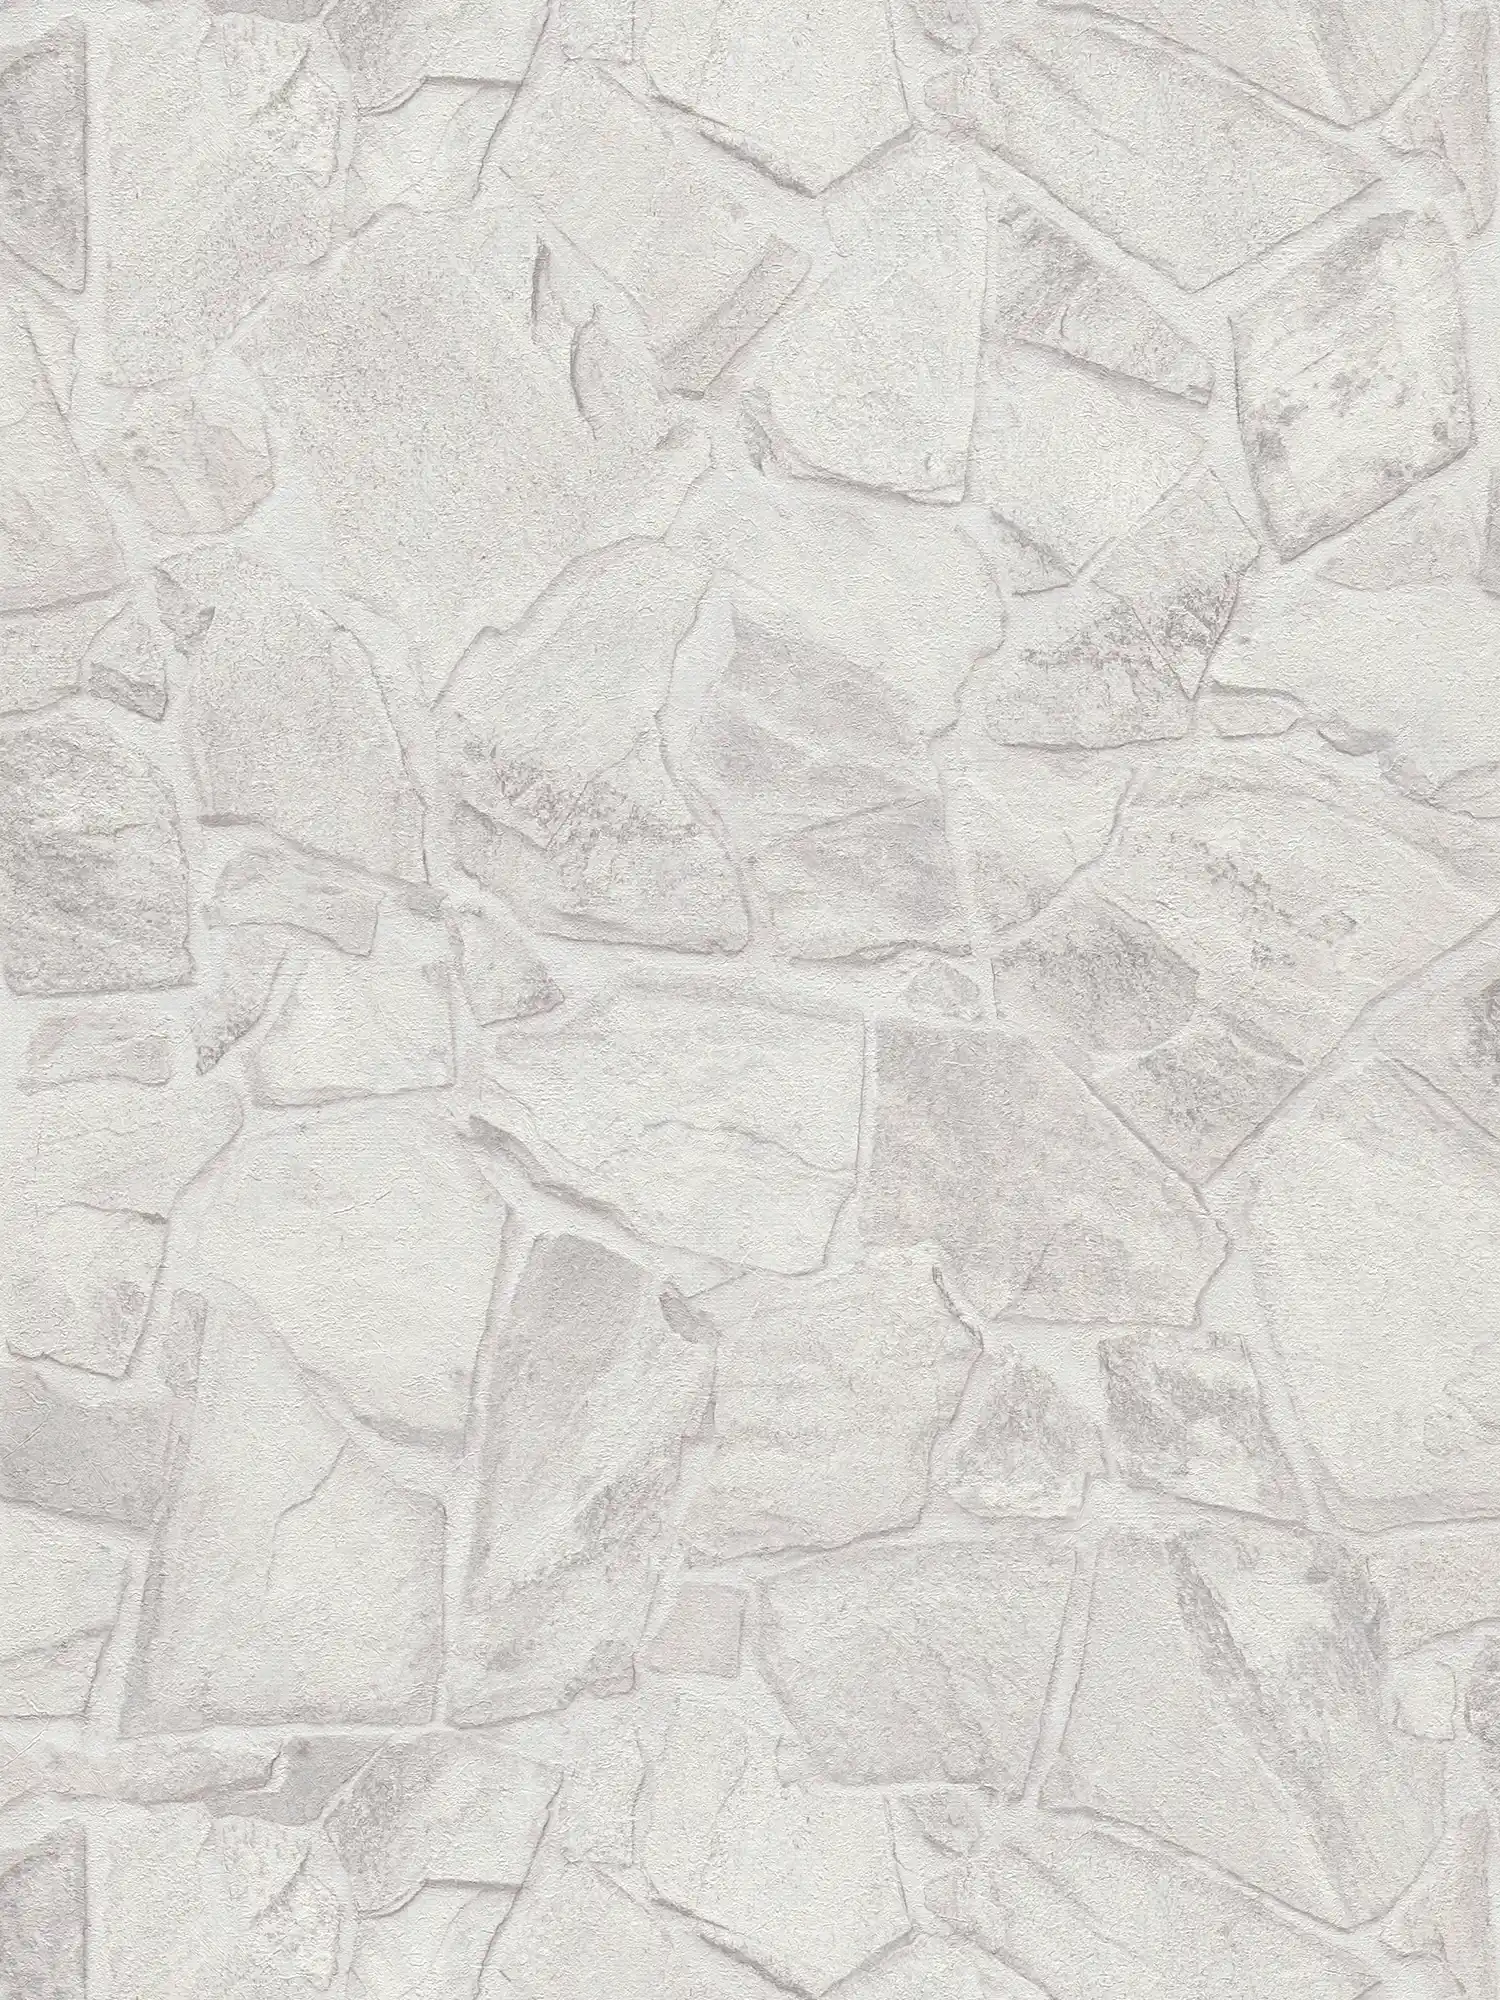 Stone-look non-woven wallpaper with 3D effect brickwork - grey, white, grey
